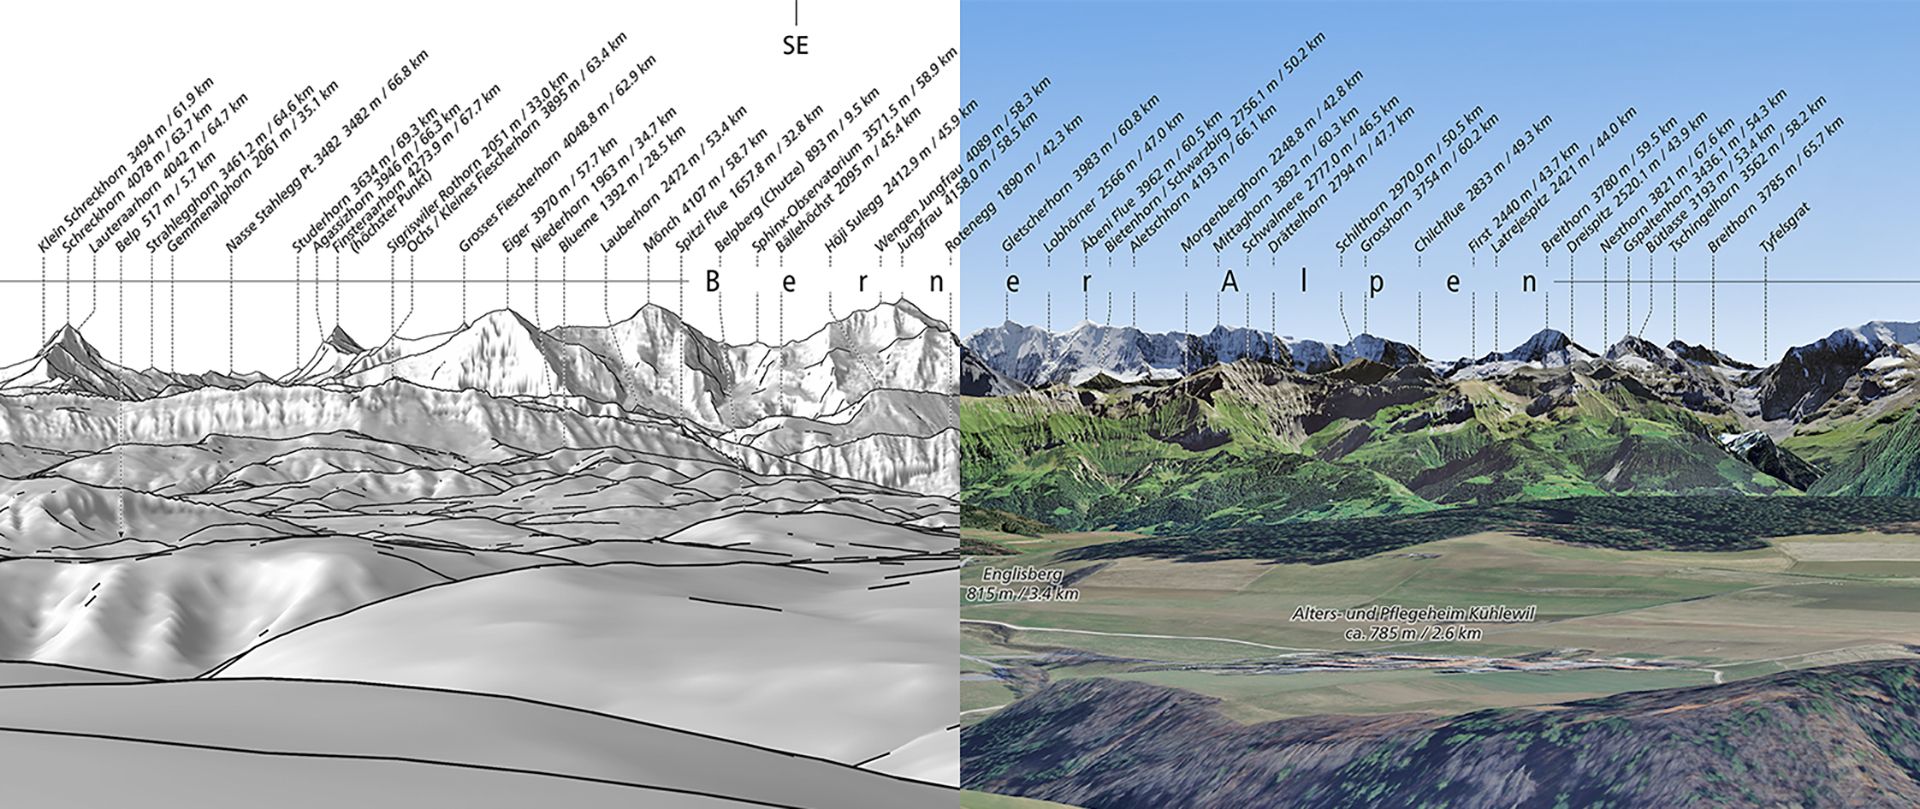 The collage shows two product variants of a DIGIRAMA Deluxe. On the left as a greyscale image and on the right a panoramic image overlaid with an orthophoto.